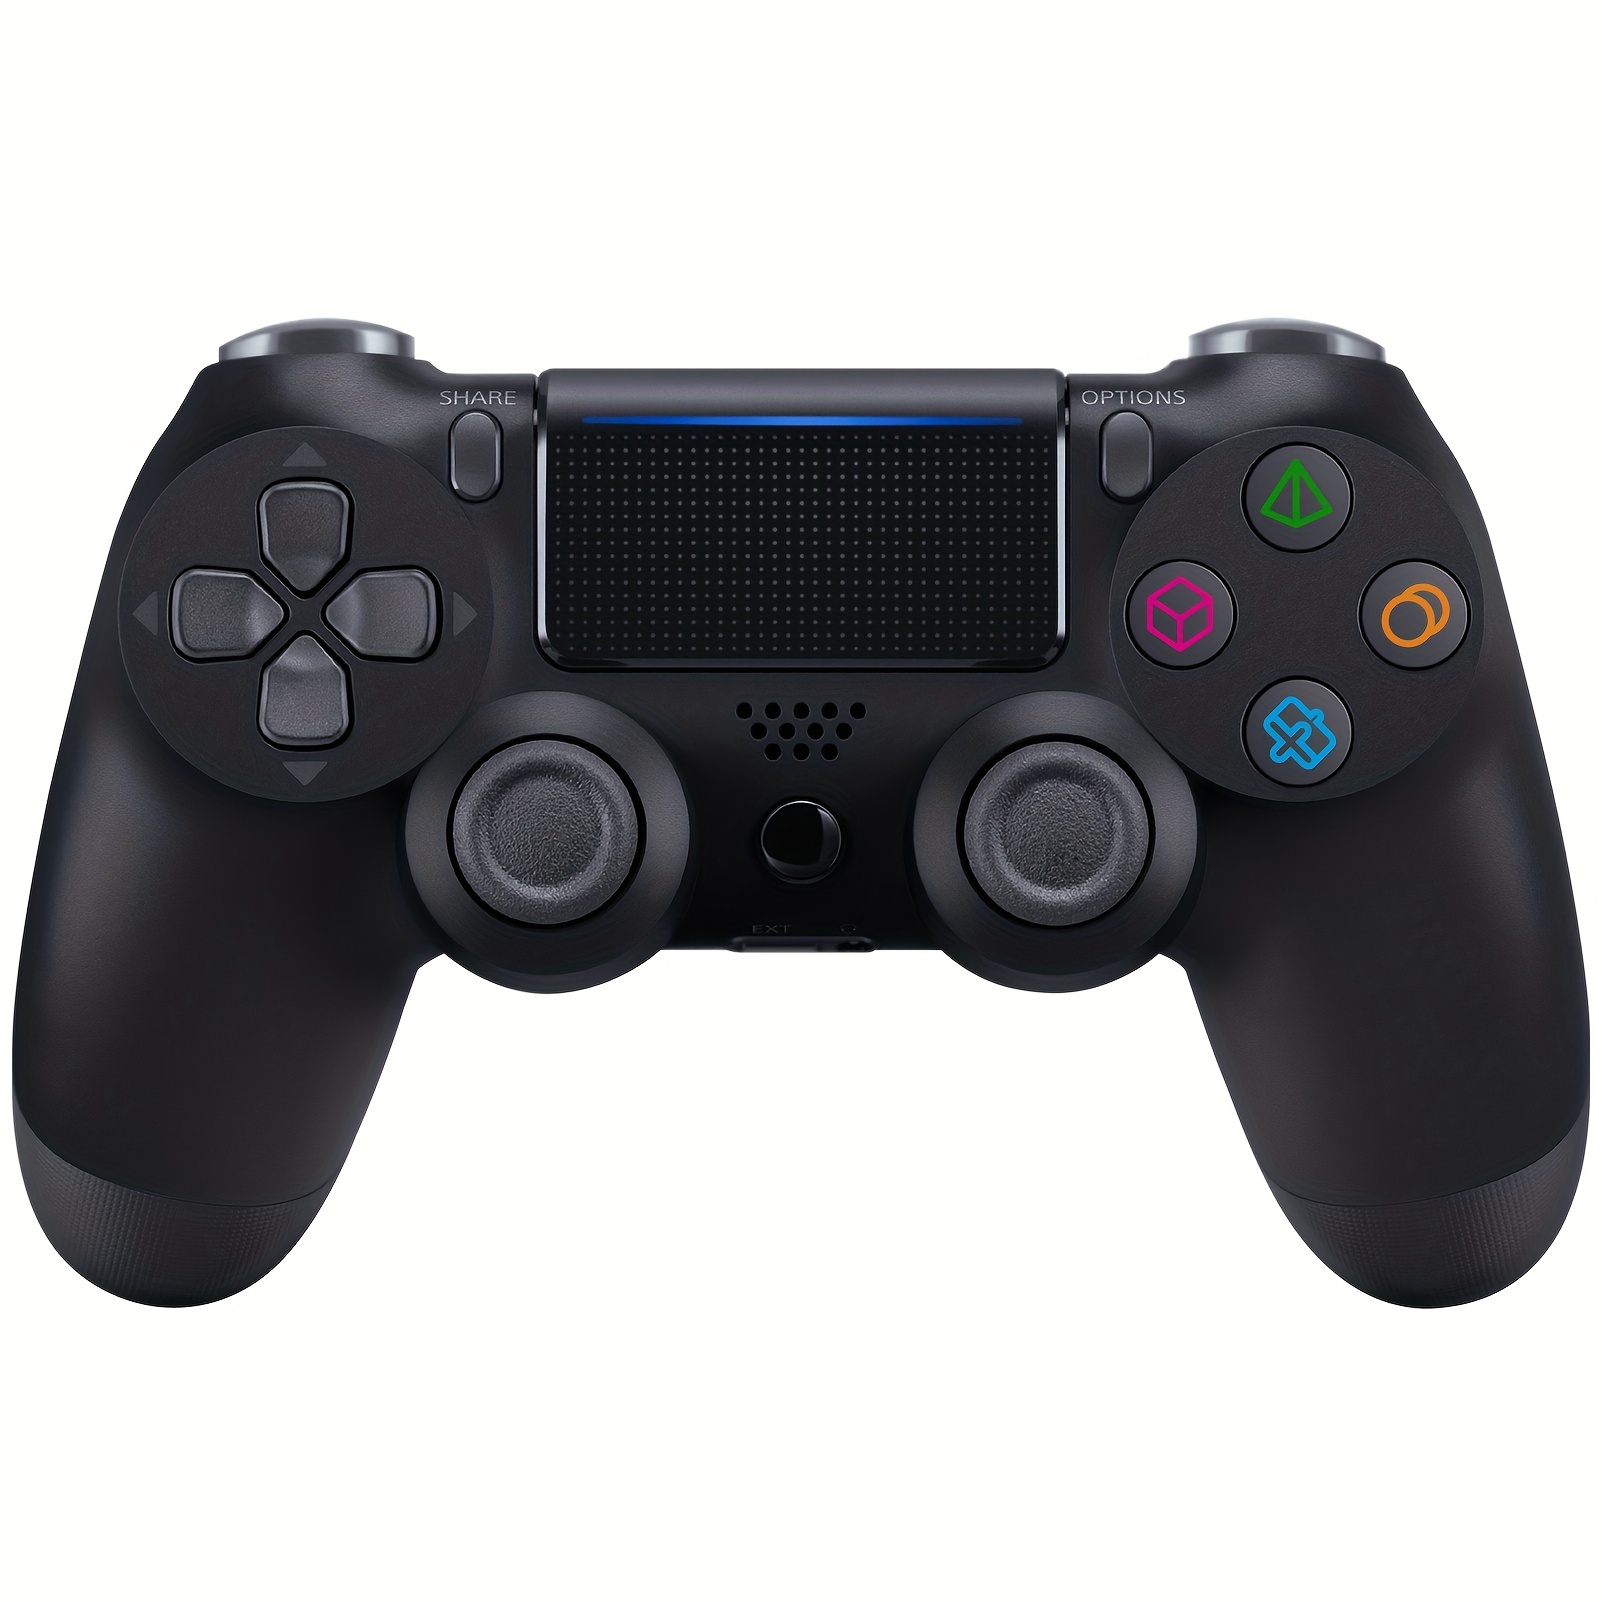 

Ps4 Controller Wireless, With Usb Cable/1000mah Battery/dual Vibration/6-axis Motion Control/3.5mm Audio Jack/multi Touch Pad/share Button, Ps4 Controller Compatible With Ps4/slim/pro/pc